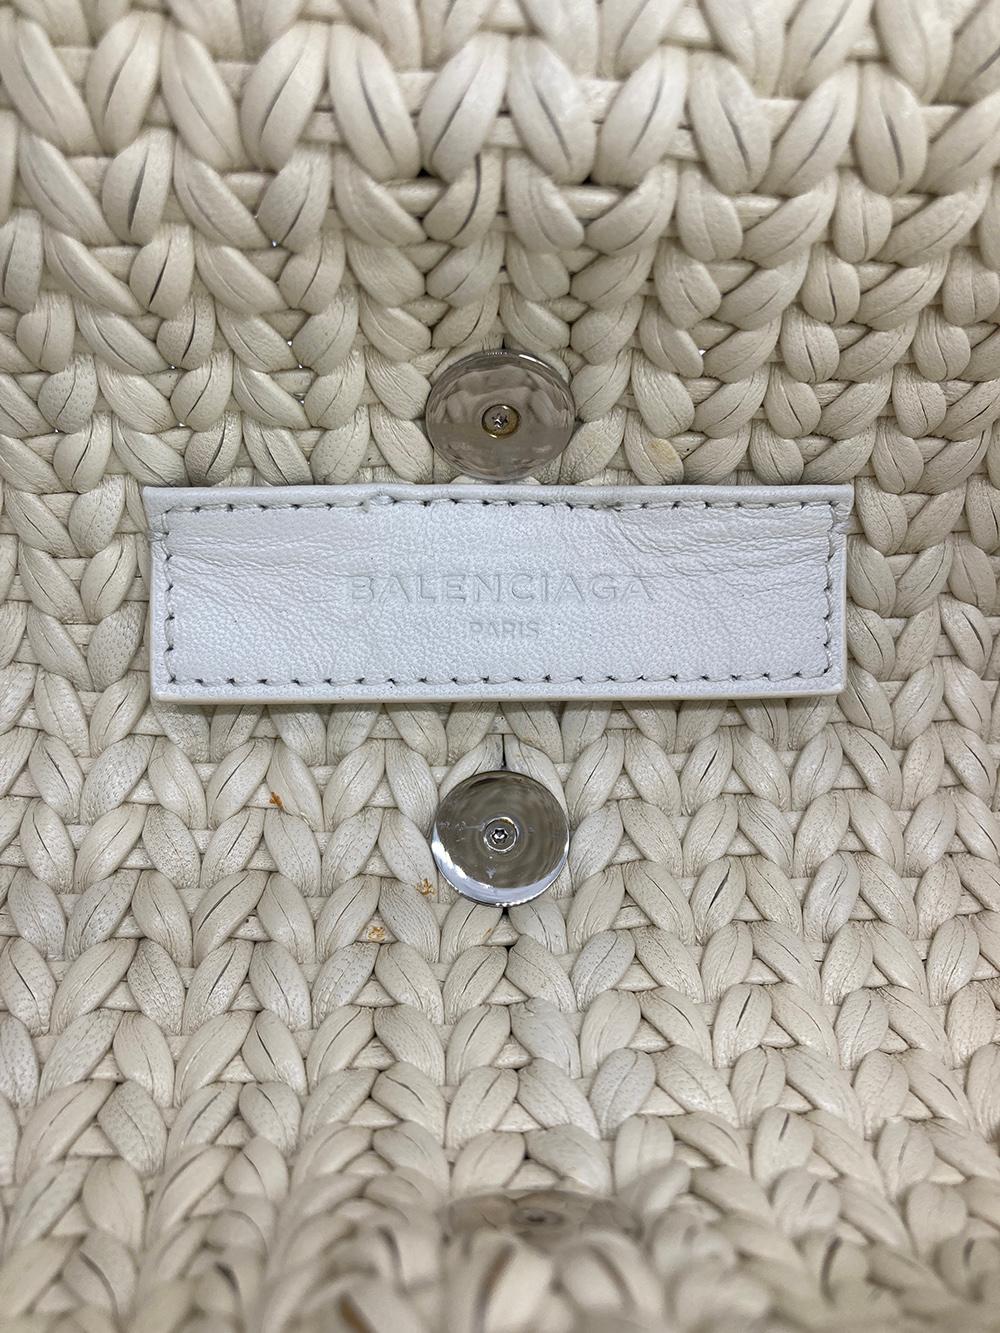 Balenciaga White Leather Tresse Fringe Clutch in excellent condition. Woven white leather with 10